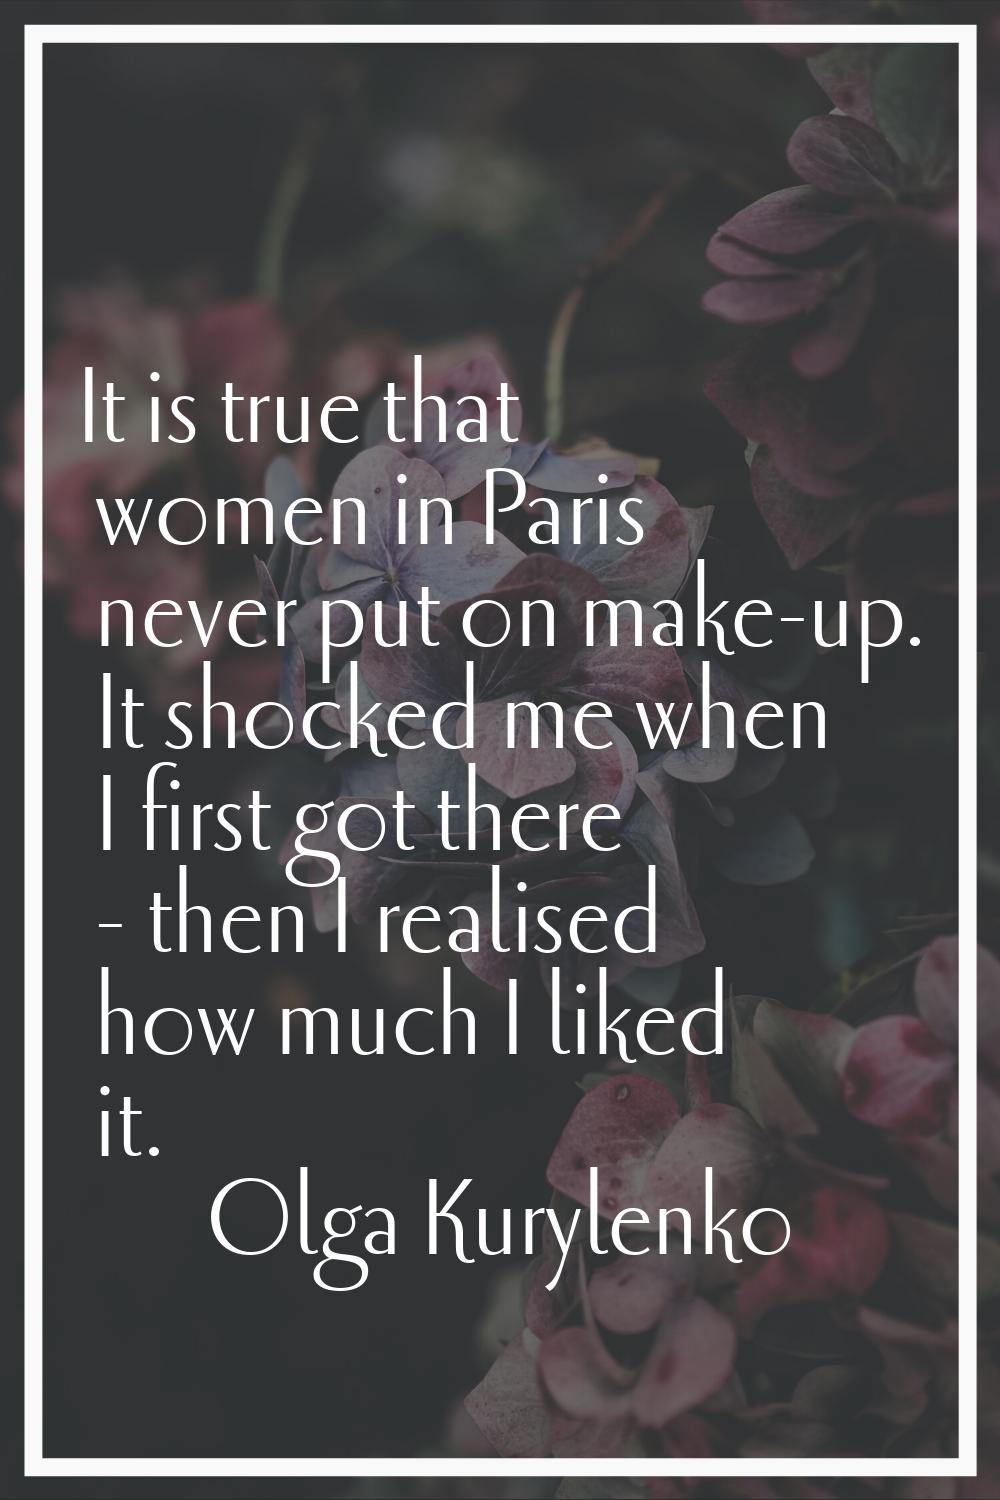 It is true that women in Paris never put on make-up. It shocked me when I first got there - then I 